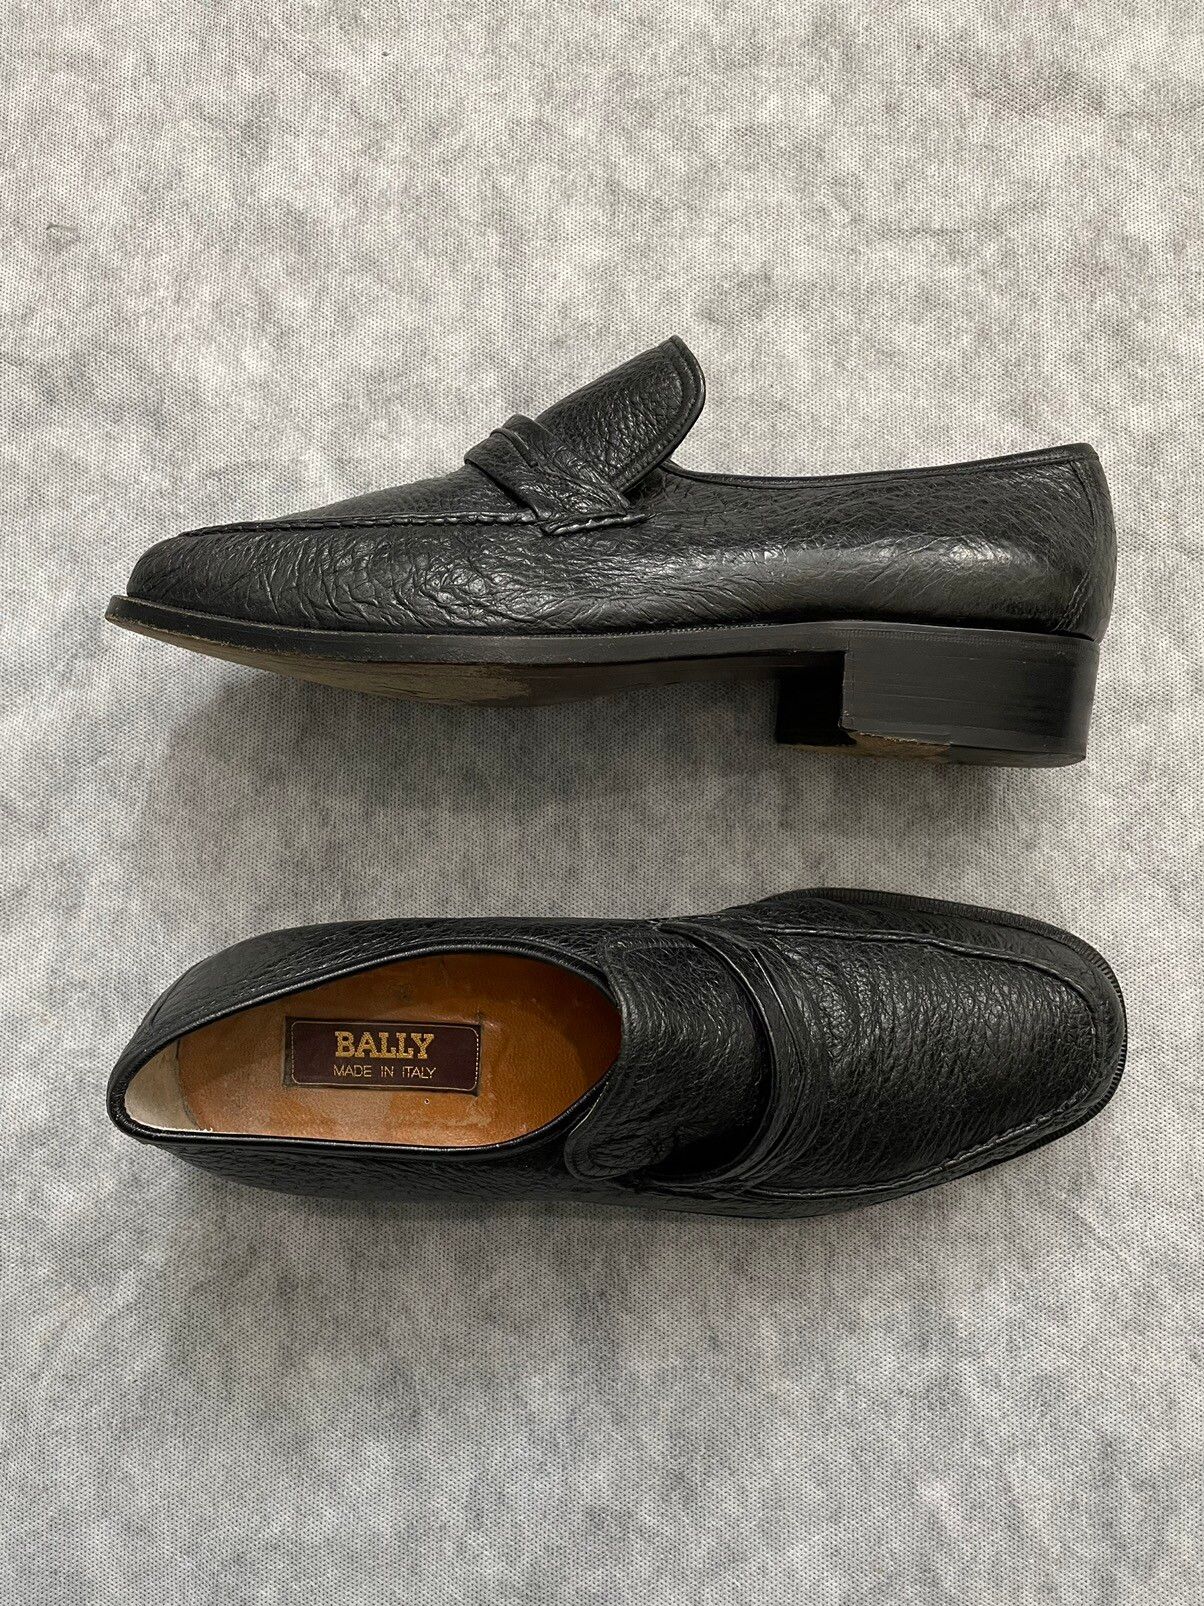 Vintage Mens BALLY Black Classic Penny Loafers dress shoes | Grailed